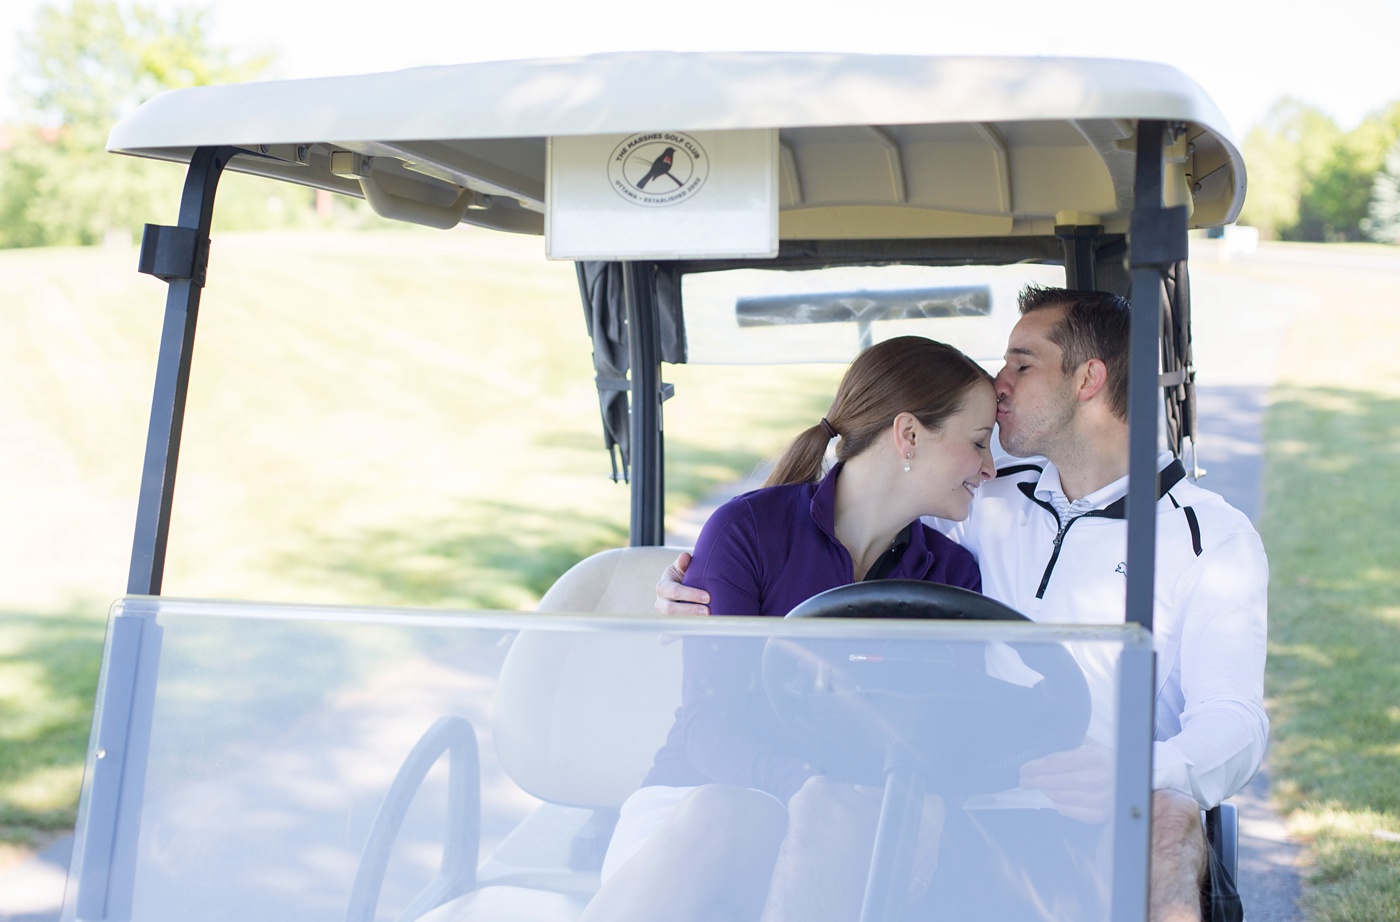 The-Marshes-Golf-Engagement